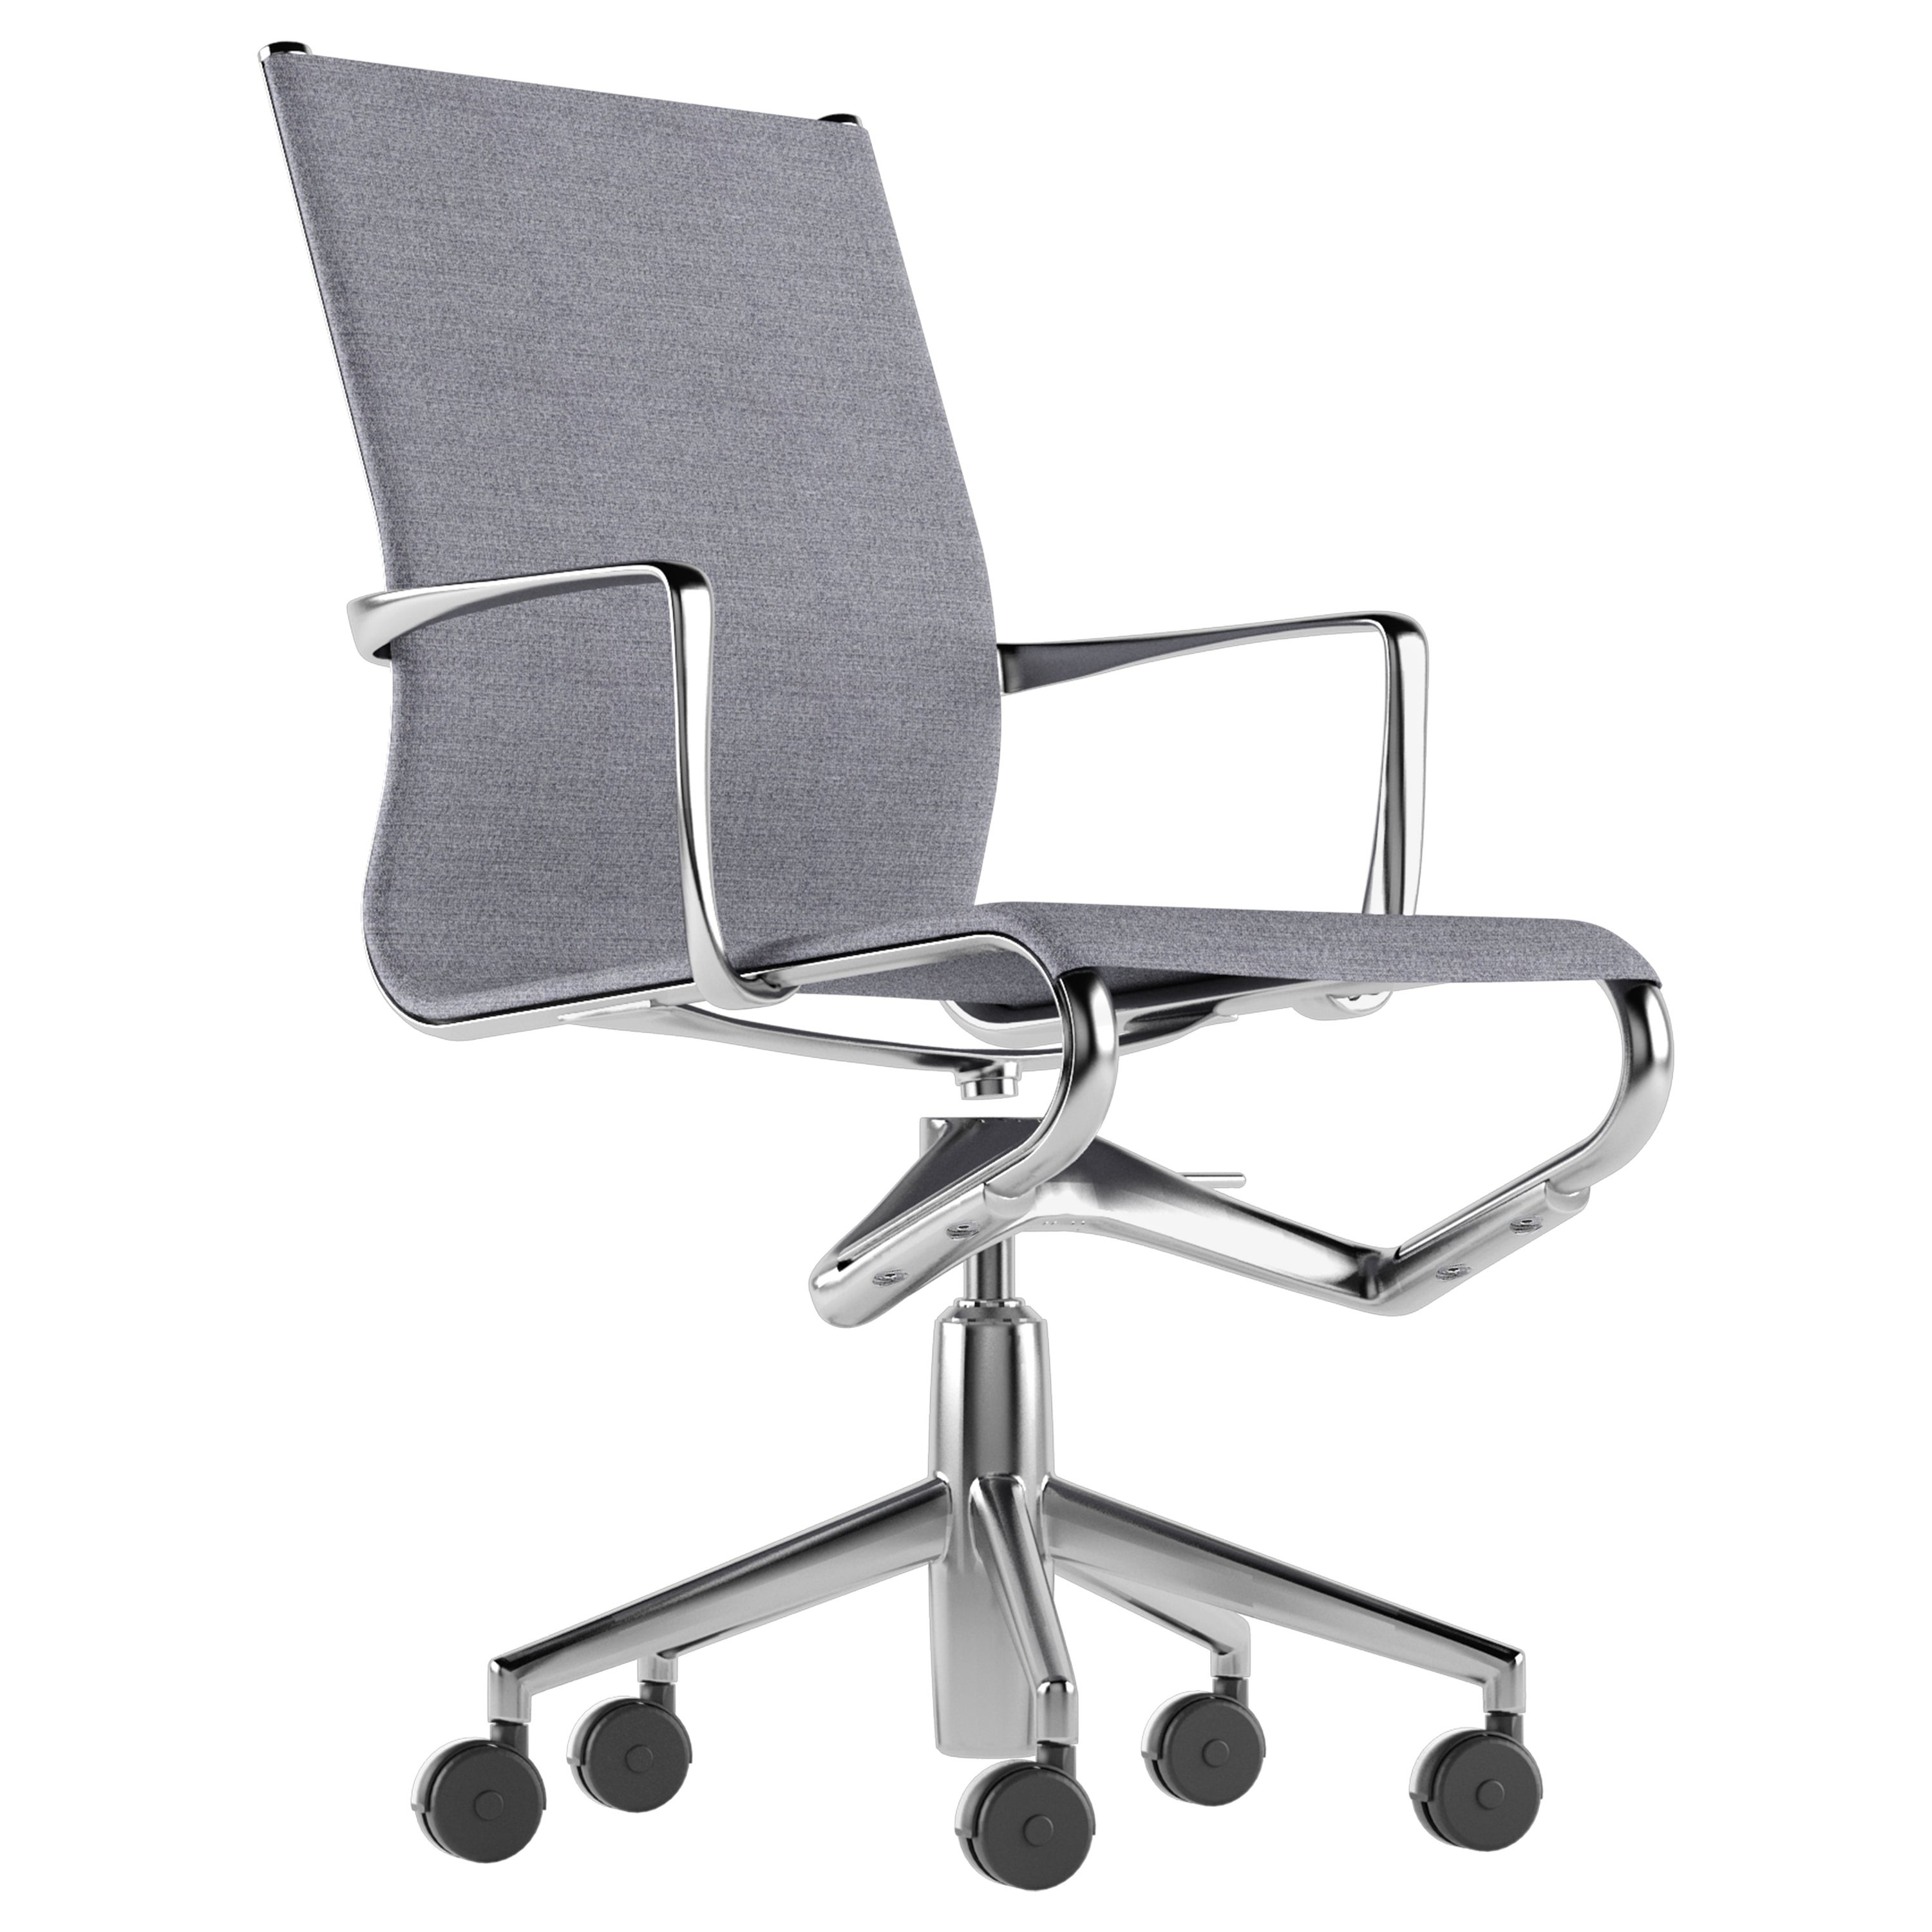 Alias 434 Rollingframe 44 Chair in Grey Seat with Chromed Aluminum Frame